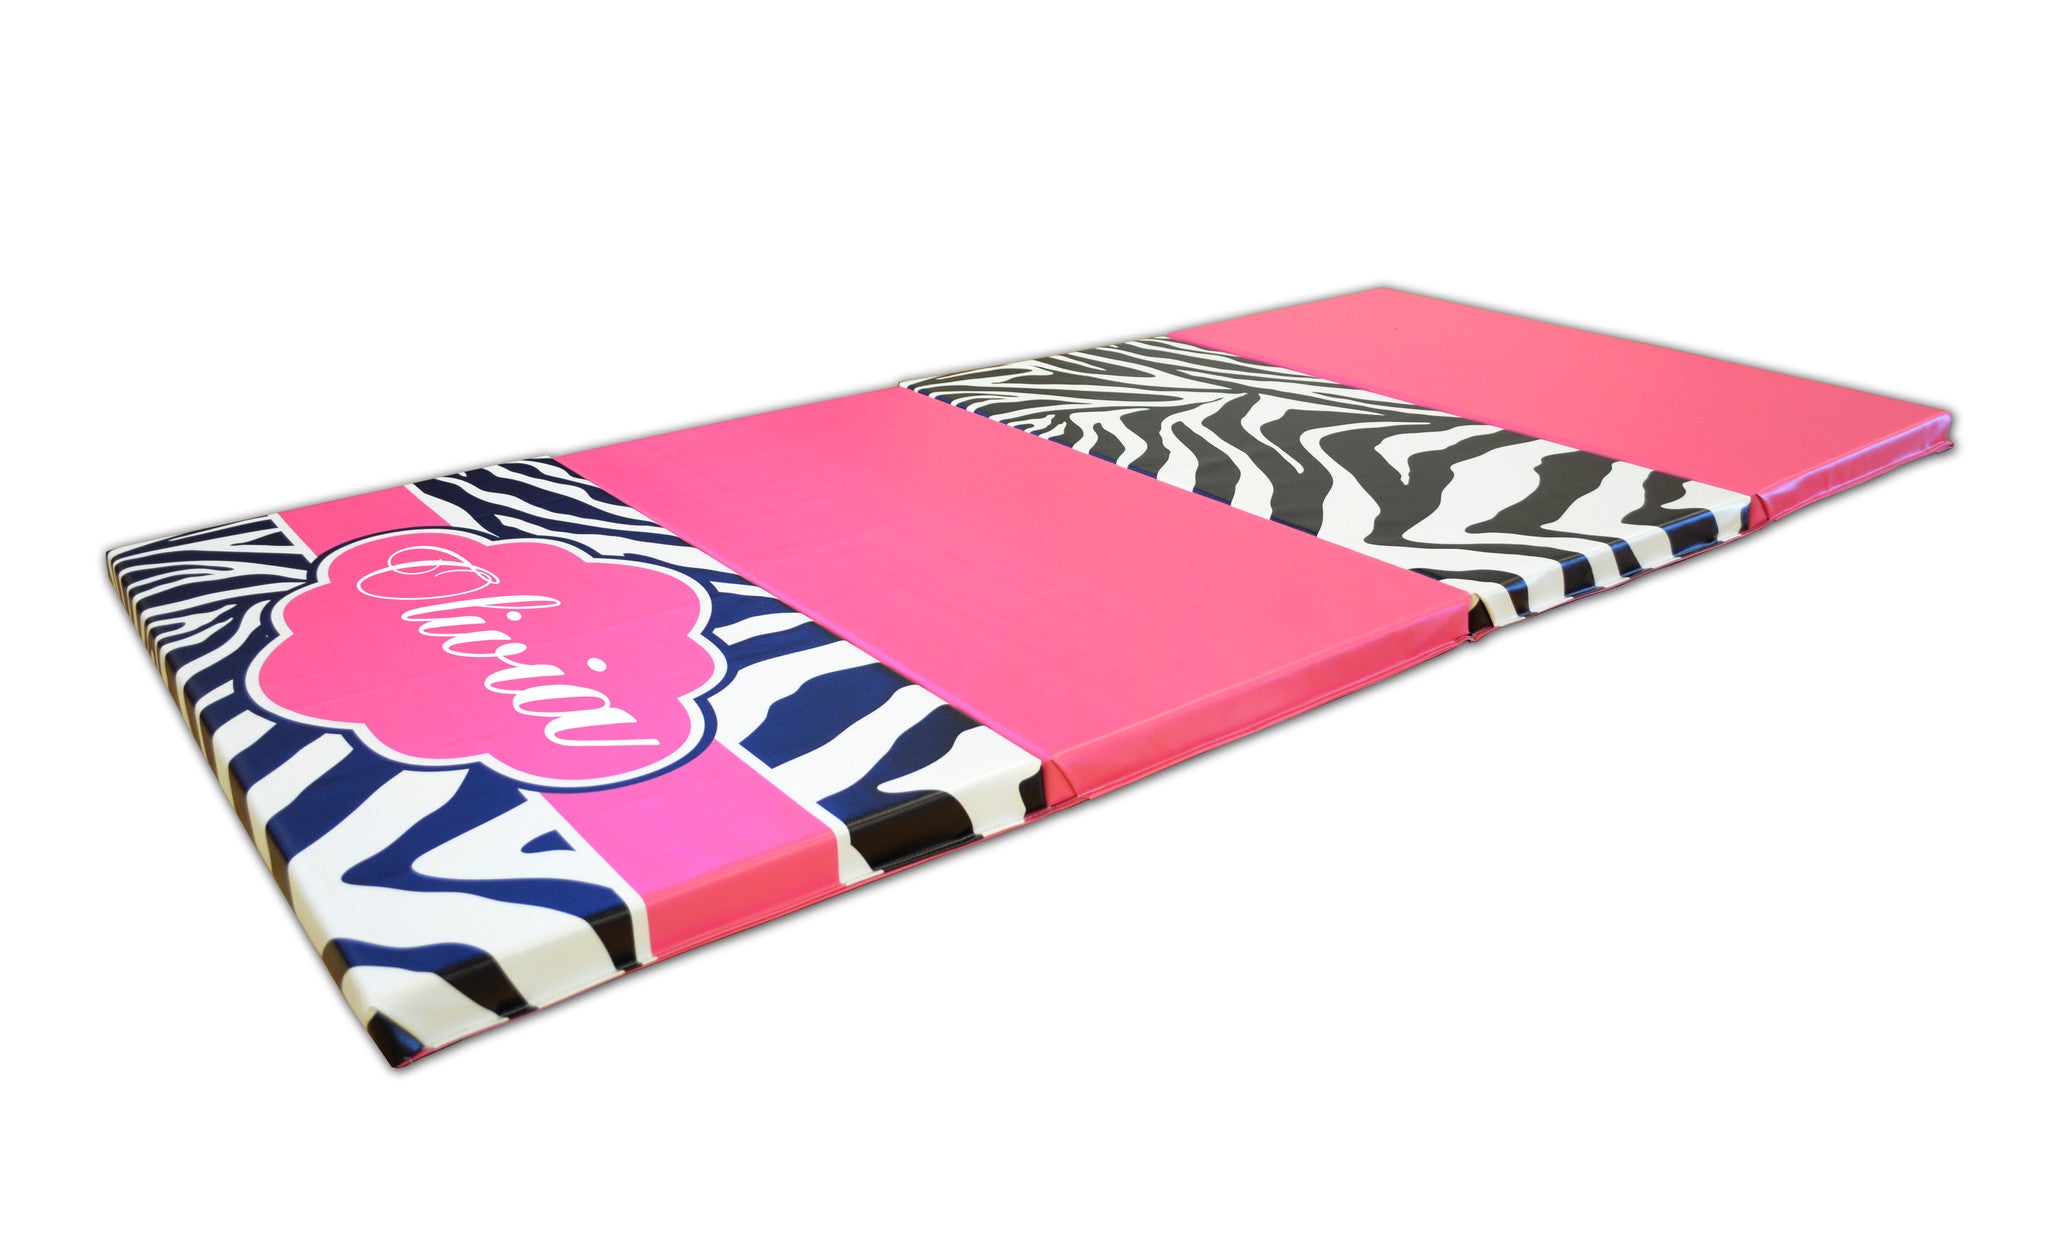 Buy together and Save! Pink Zebra Print Monogram 4' x 8' Mat and Folding Incline Mat